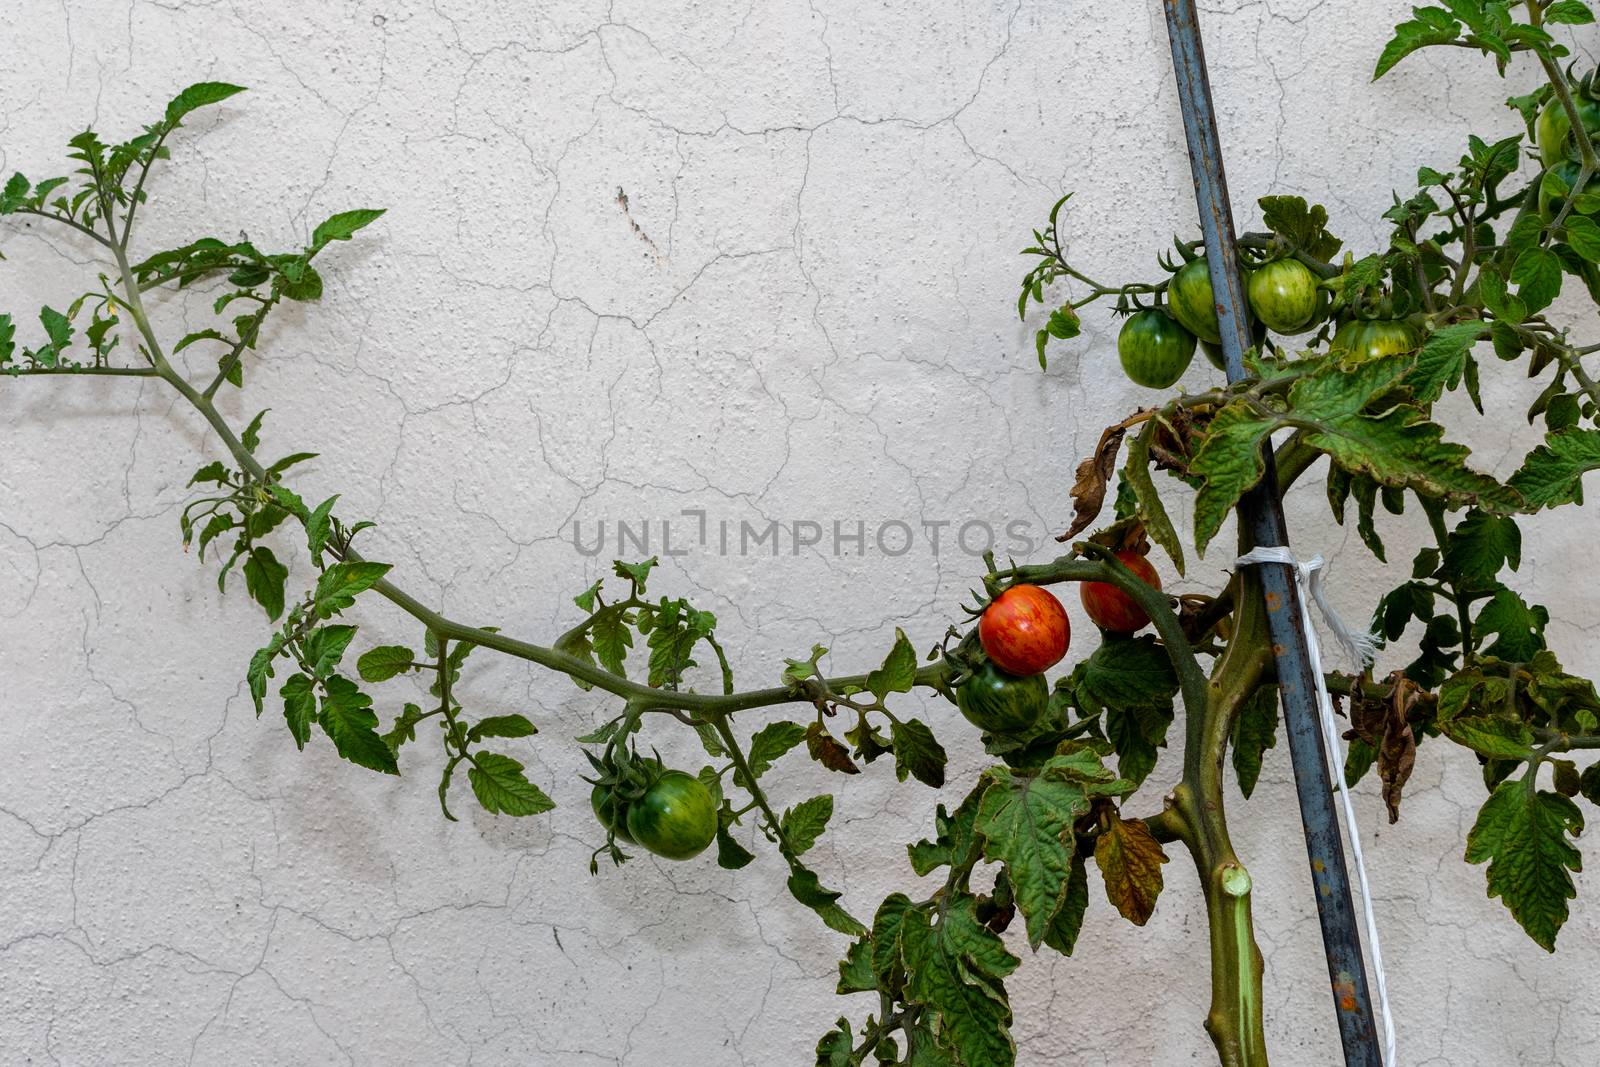 Tomato plant with green and red tomatoes by Tonhio